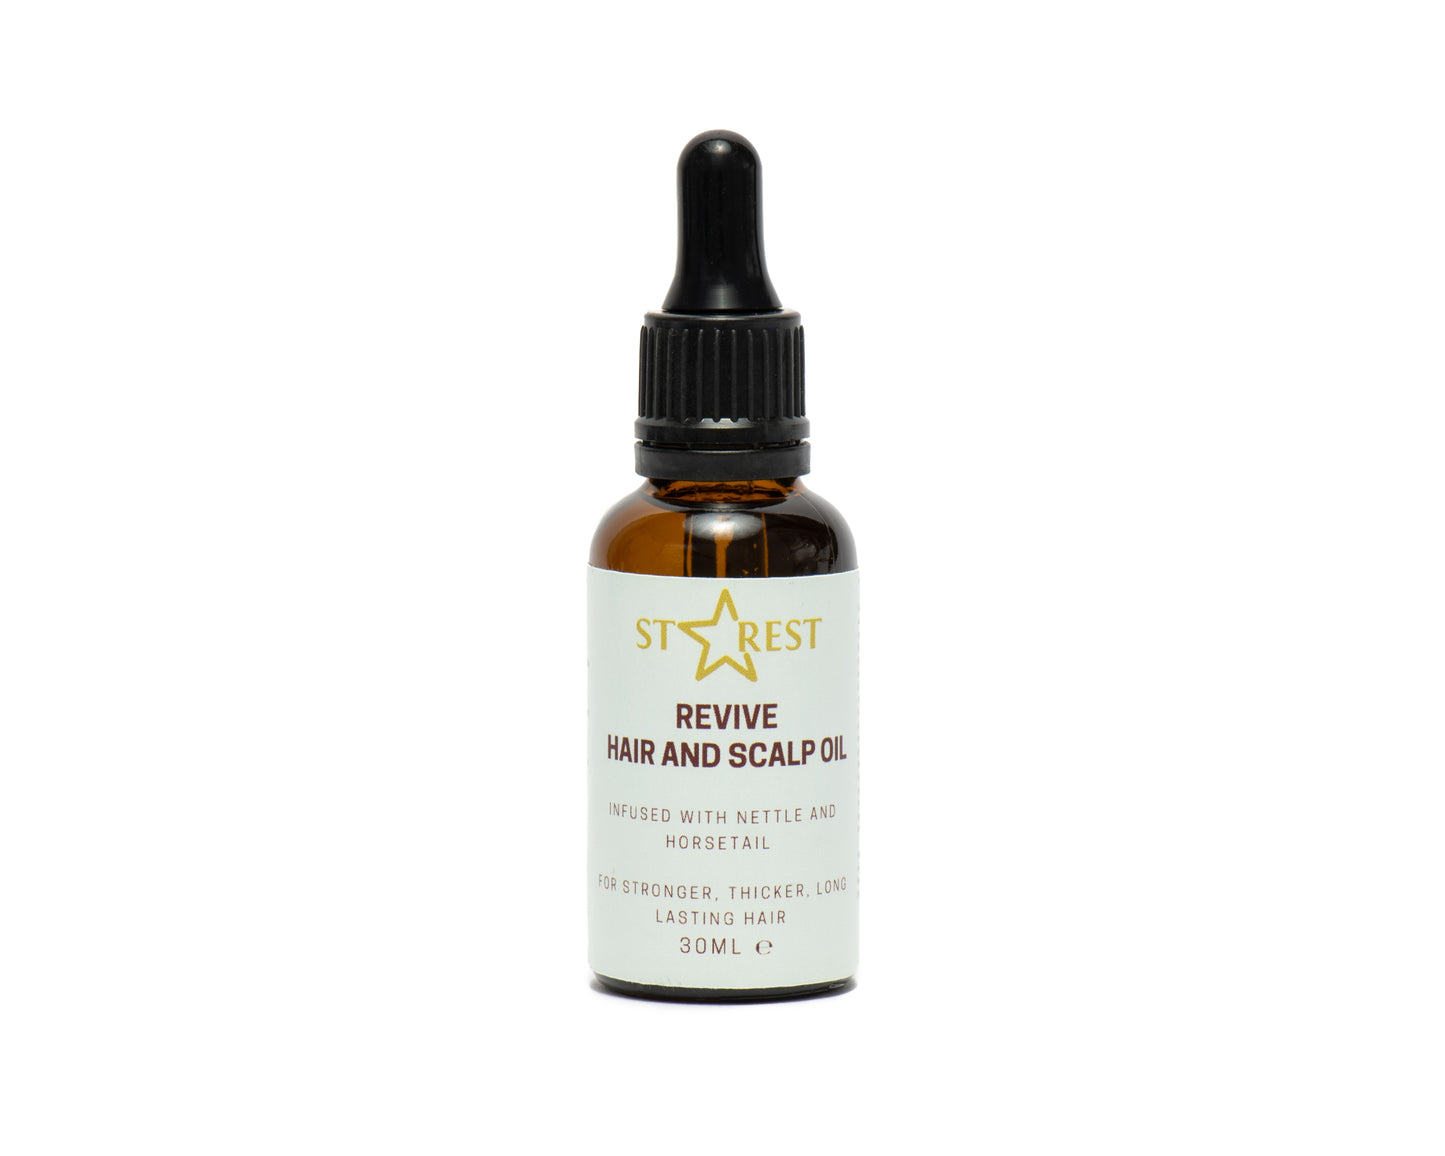 Revive Hair and Scalp Oil